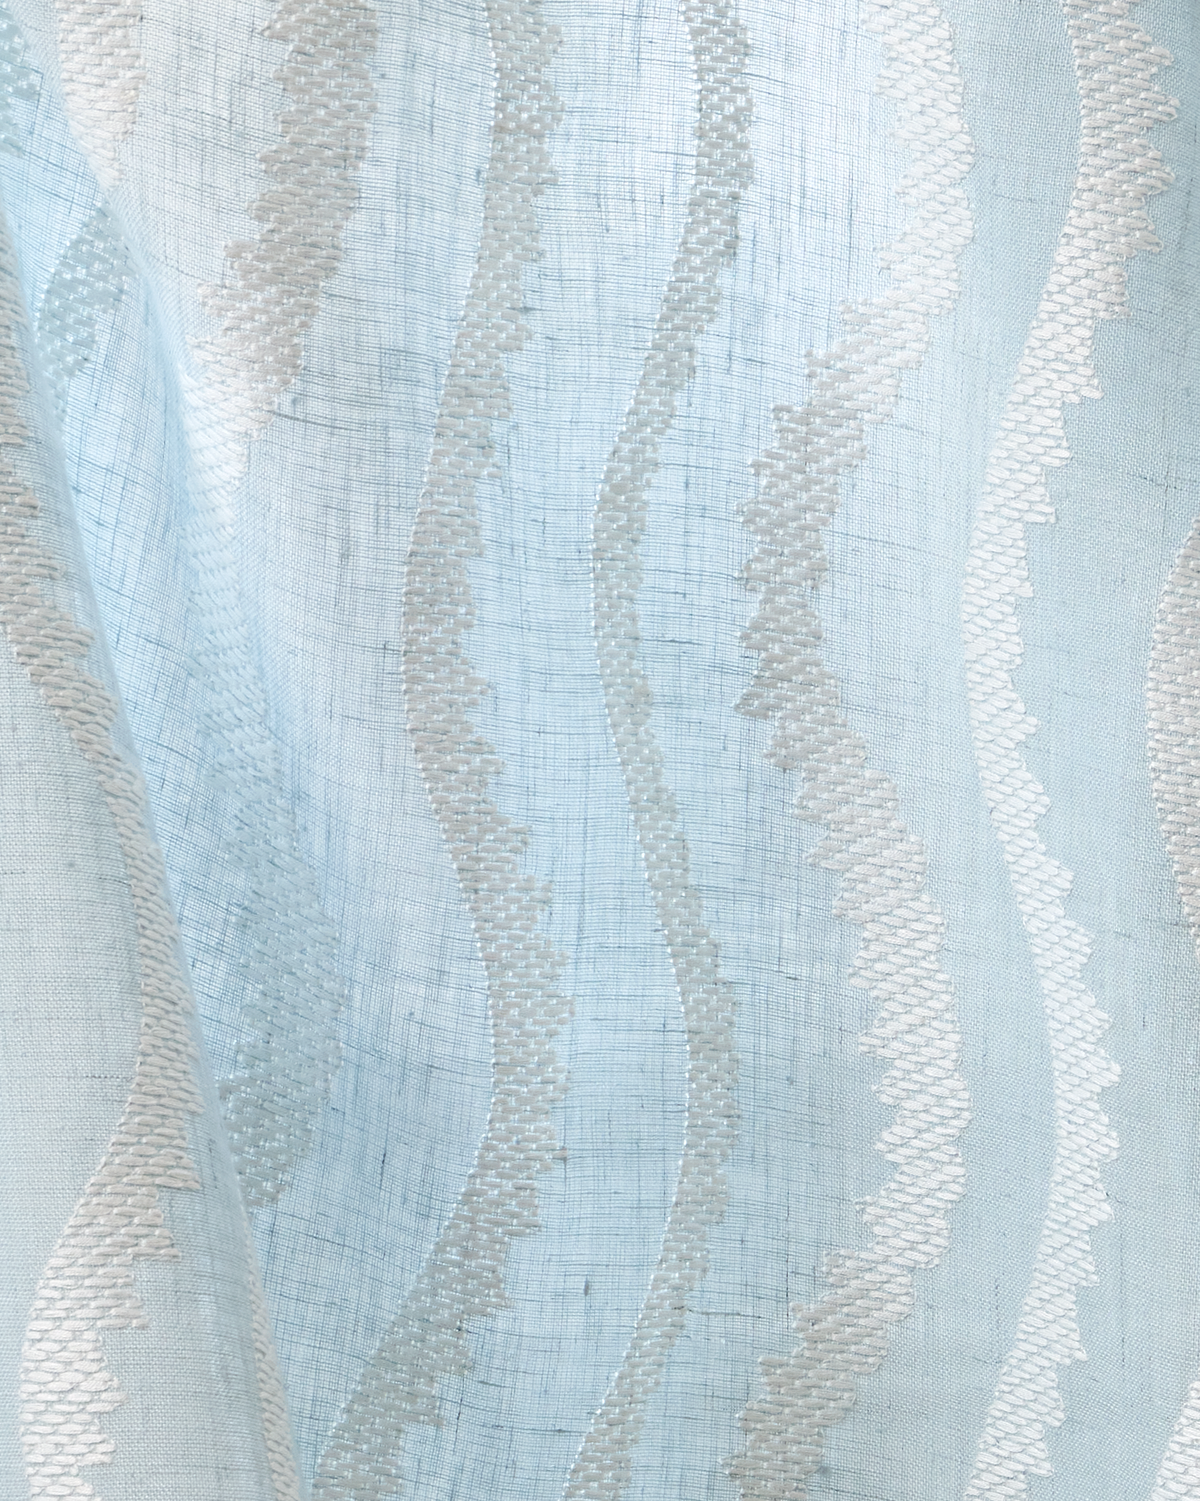 Notched Vines Fabric in Light Blue